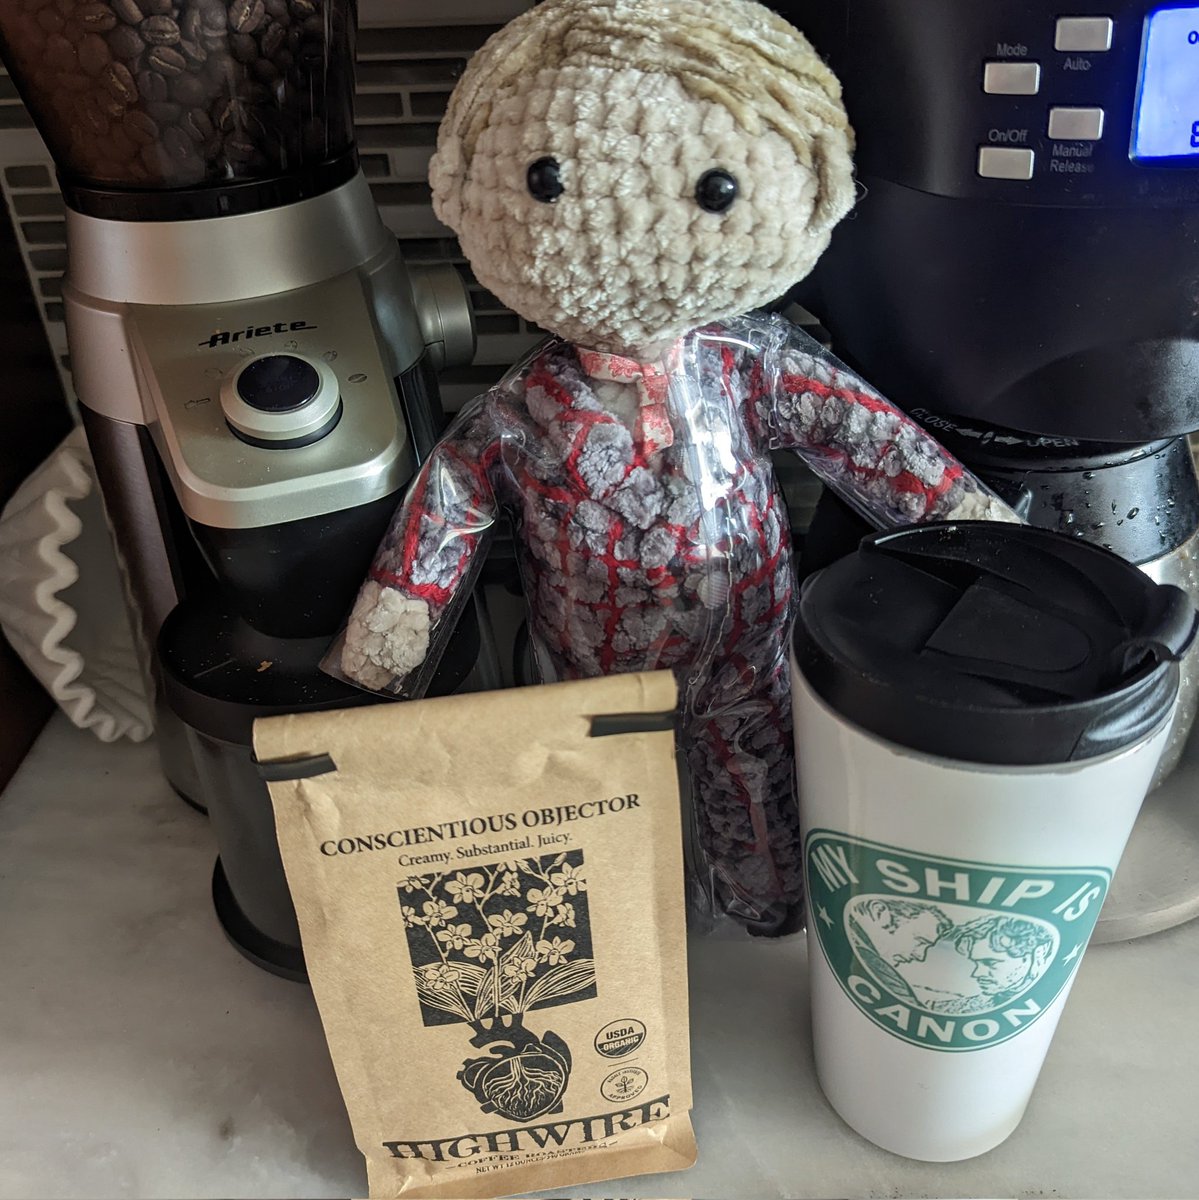 I buy coffee the way I buy wine, based on the pretty pictures on the label. I feel like #Hannibal would approve of this one 🤣

#highwirecoffee #ConscientiousObjector #MyShipIsCanon #FannibalFamilyForever #Yarnibal #Amigurumi